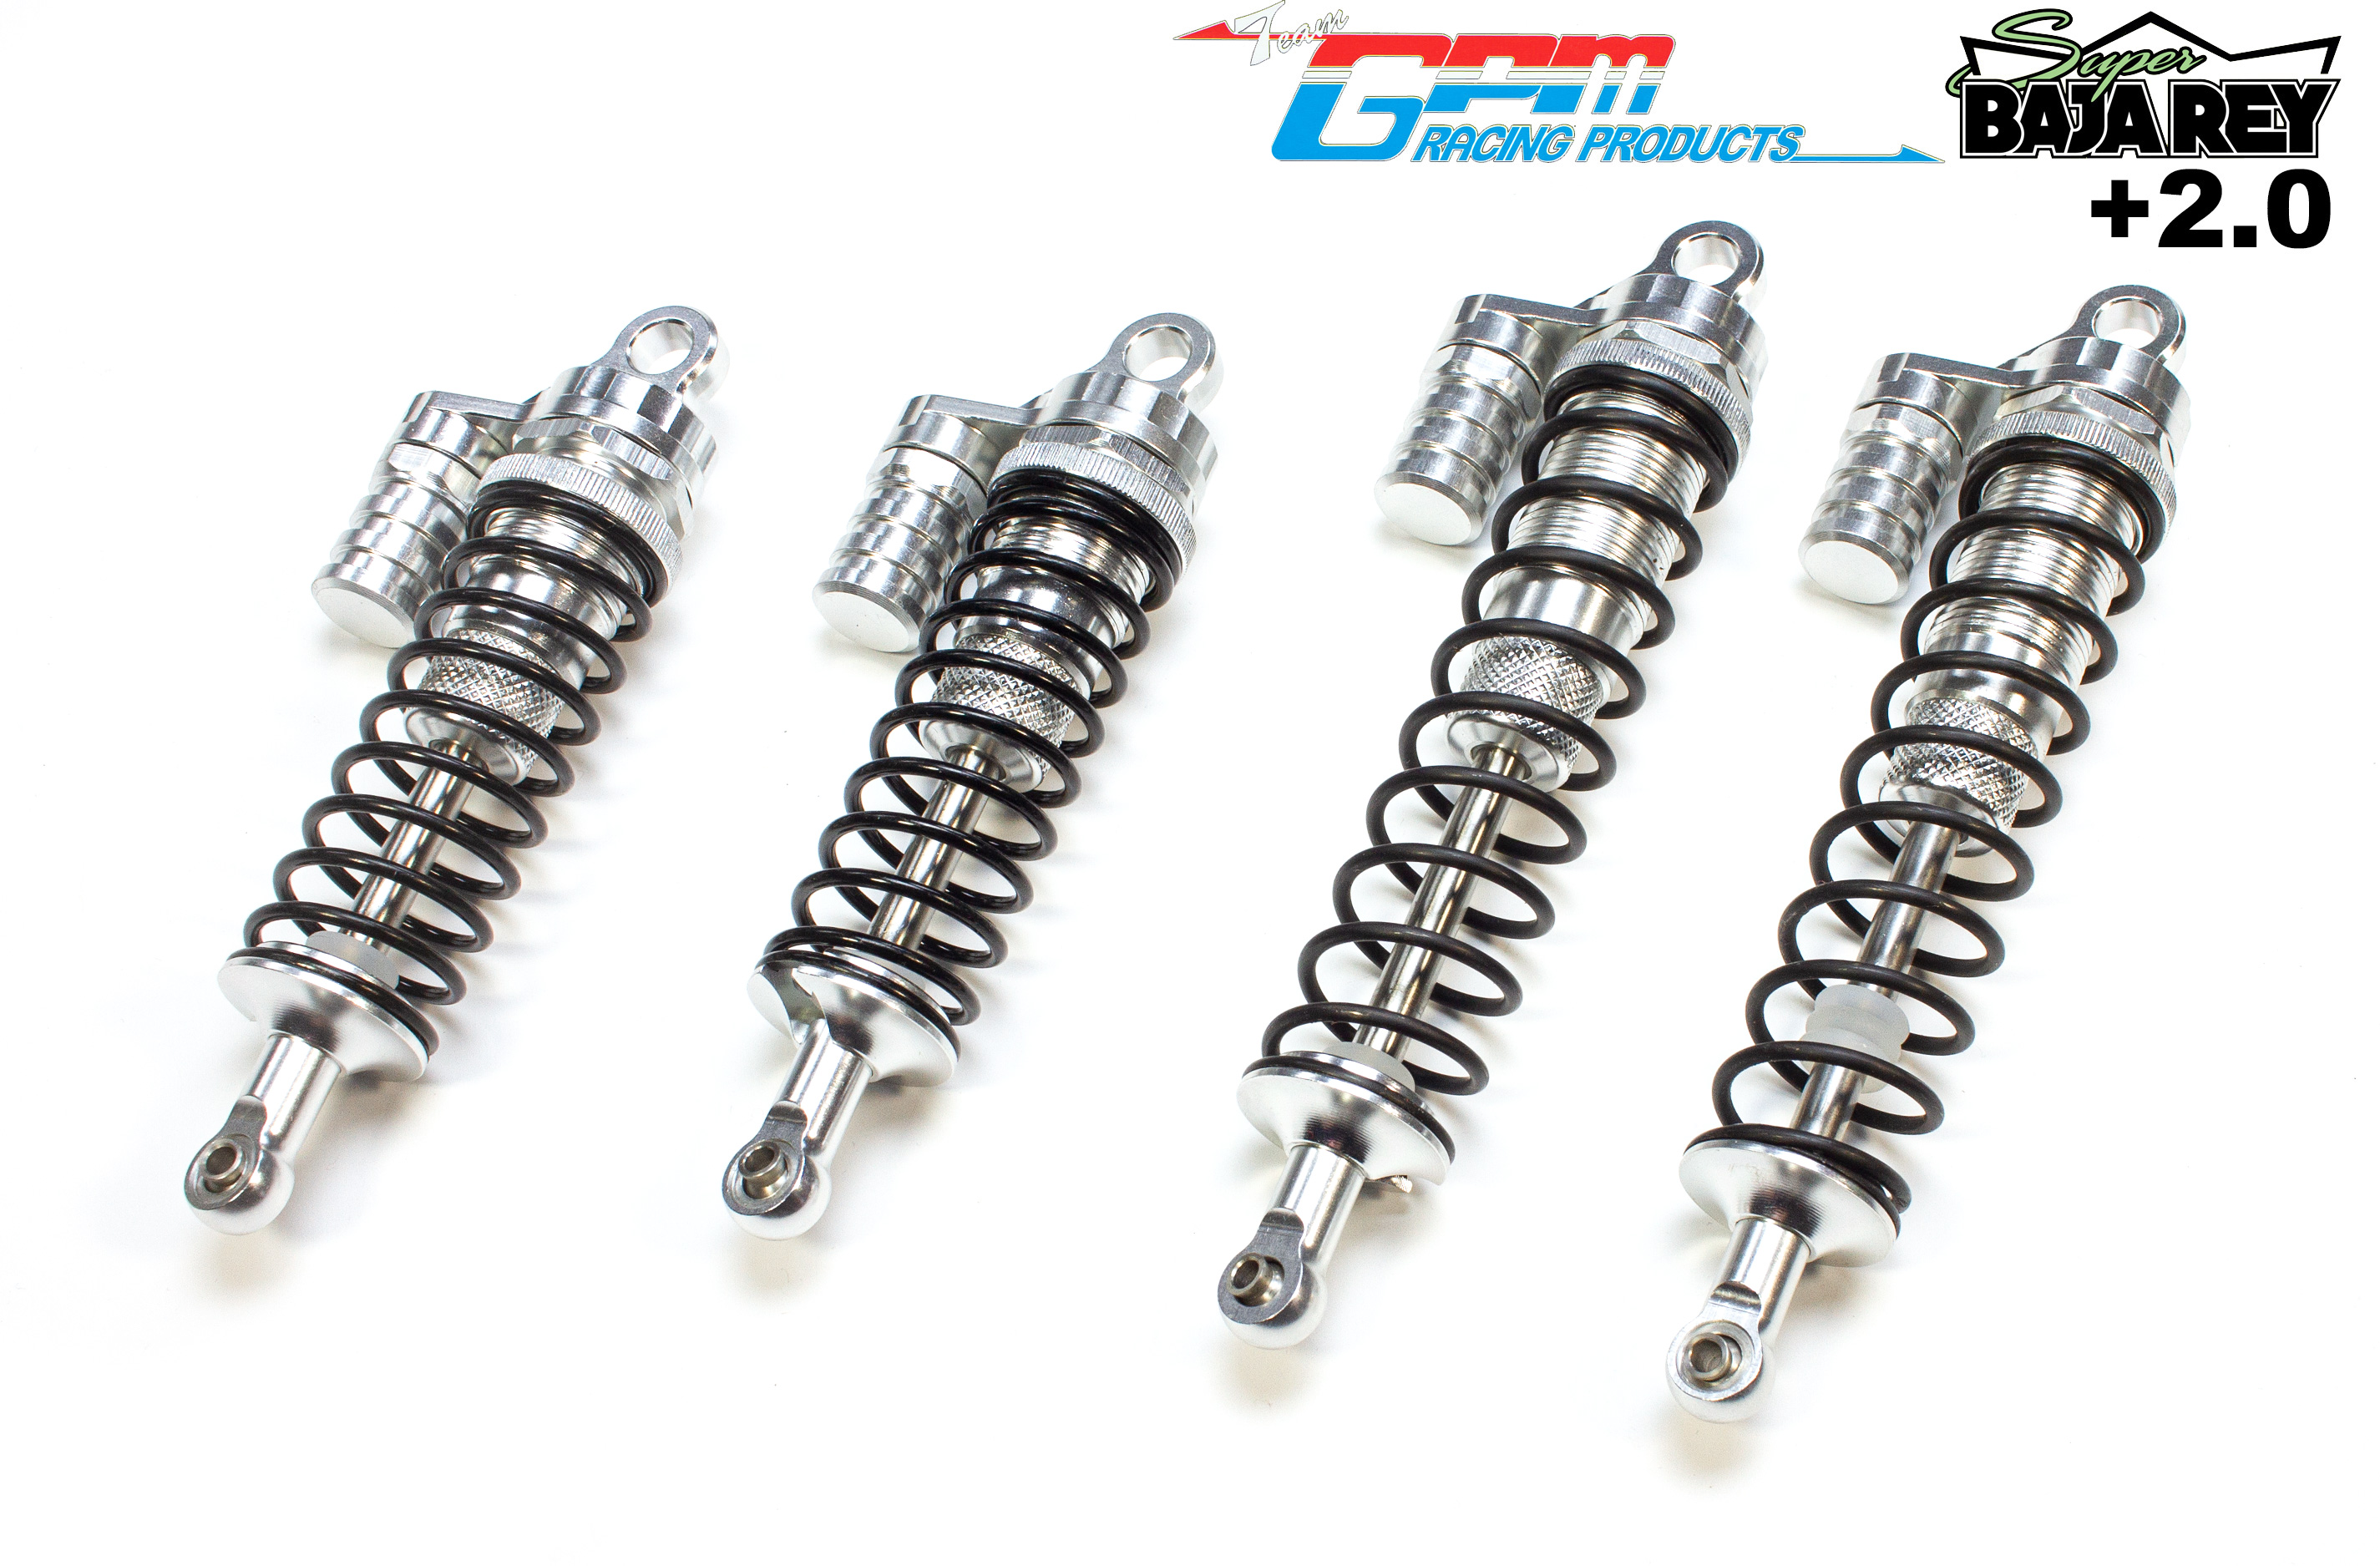 SB132F/SB170R GPM Front and Rear Piggyback Shock absorbers for Super Baja Rey (incl. 2.0)